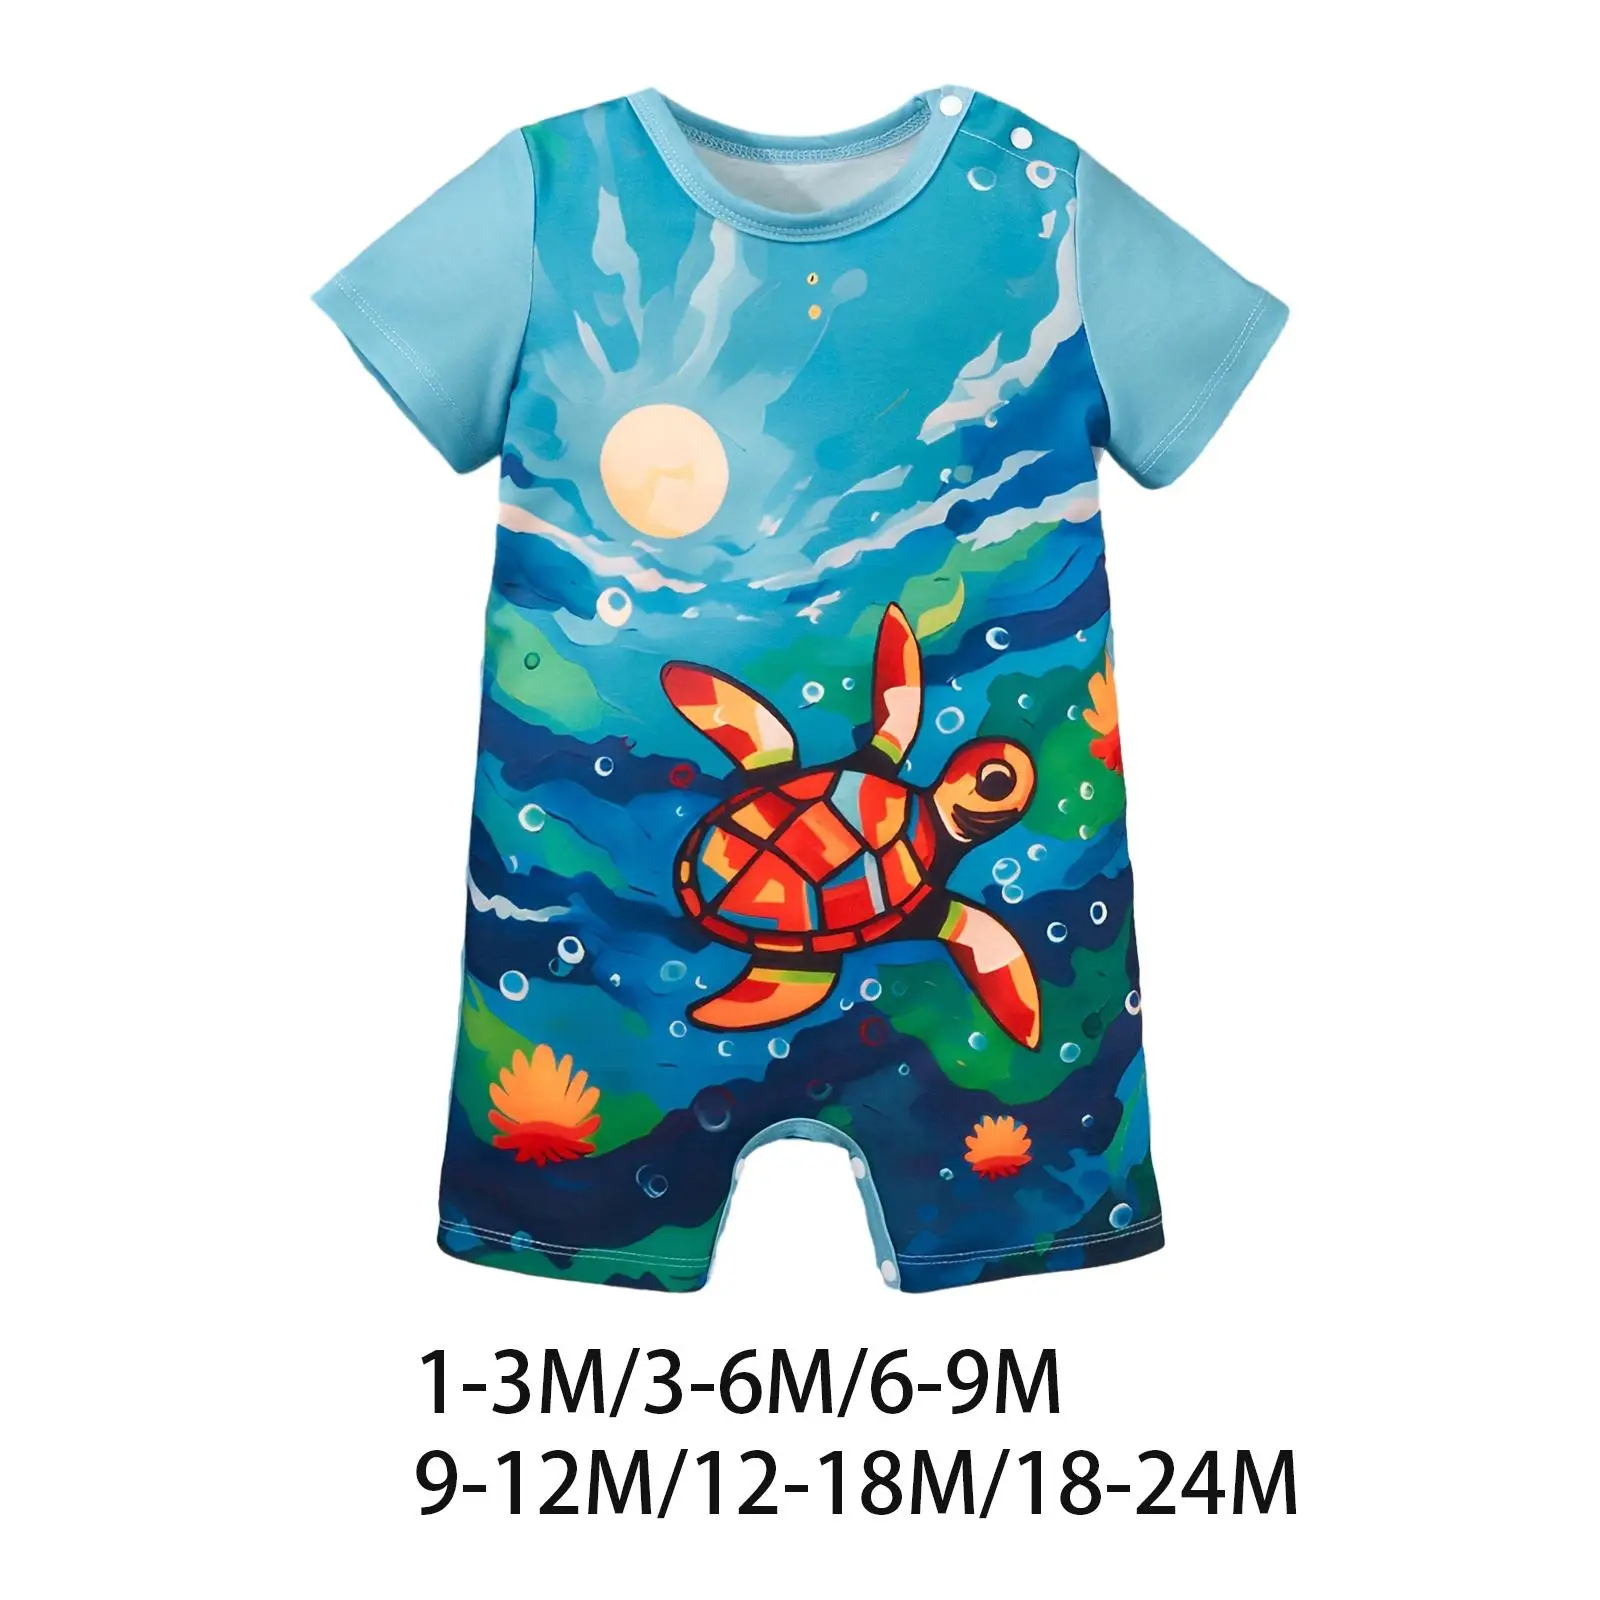 

Newborn Bodysuit Breathable Short Sleeve Sea Turtle Printed Cartoon Summer Clothes for Photograph Props Birthday Party Casual